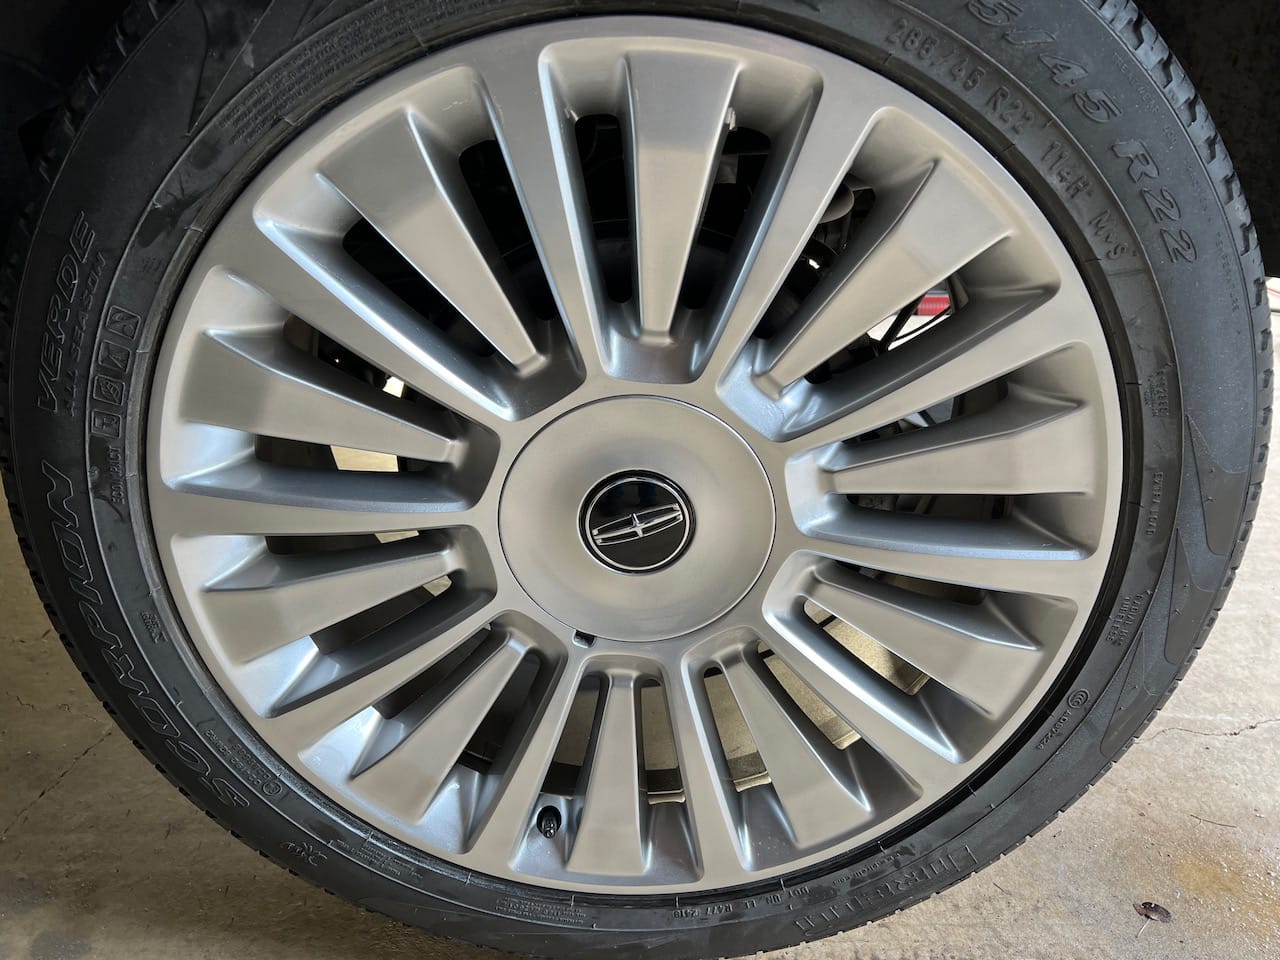 2015 Lincoln Navigator wheel restored and painted one solid color.